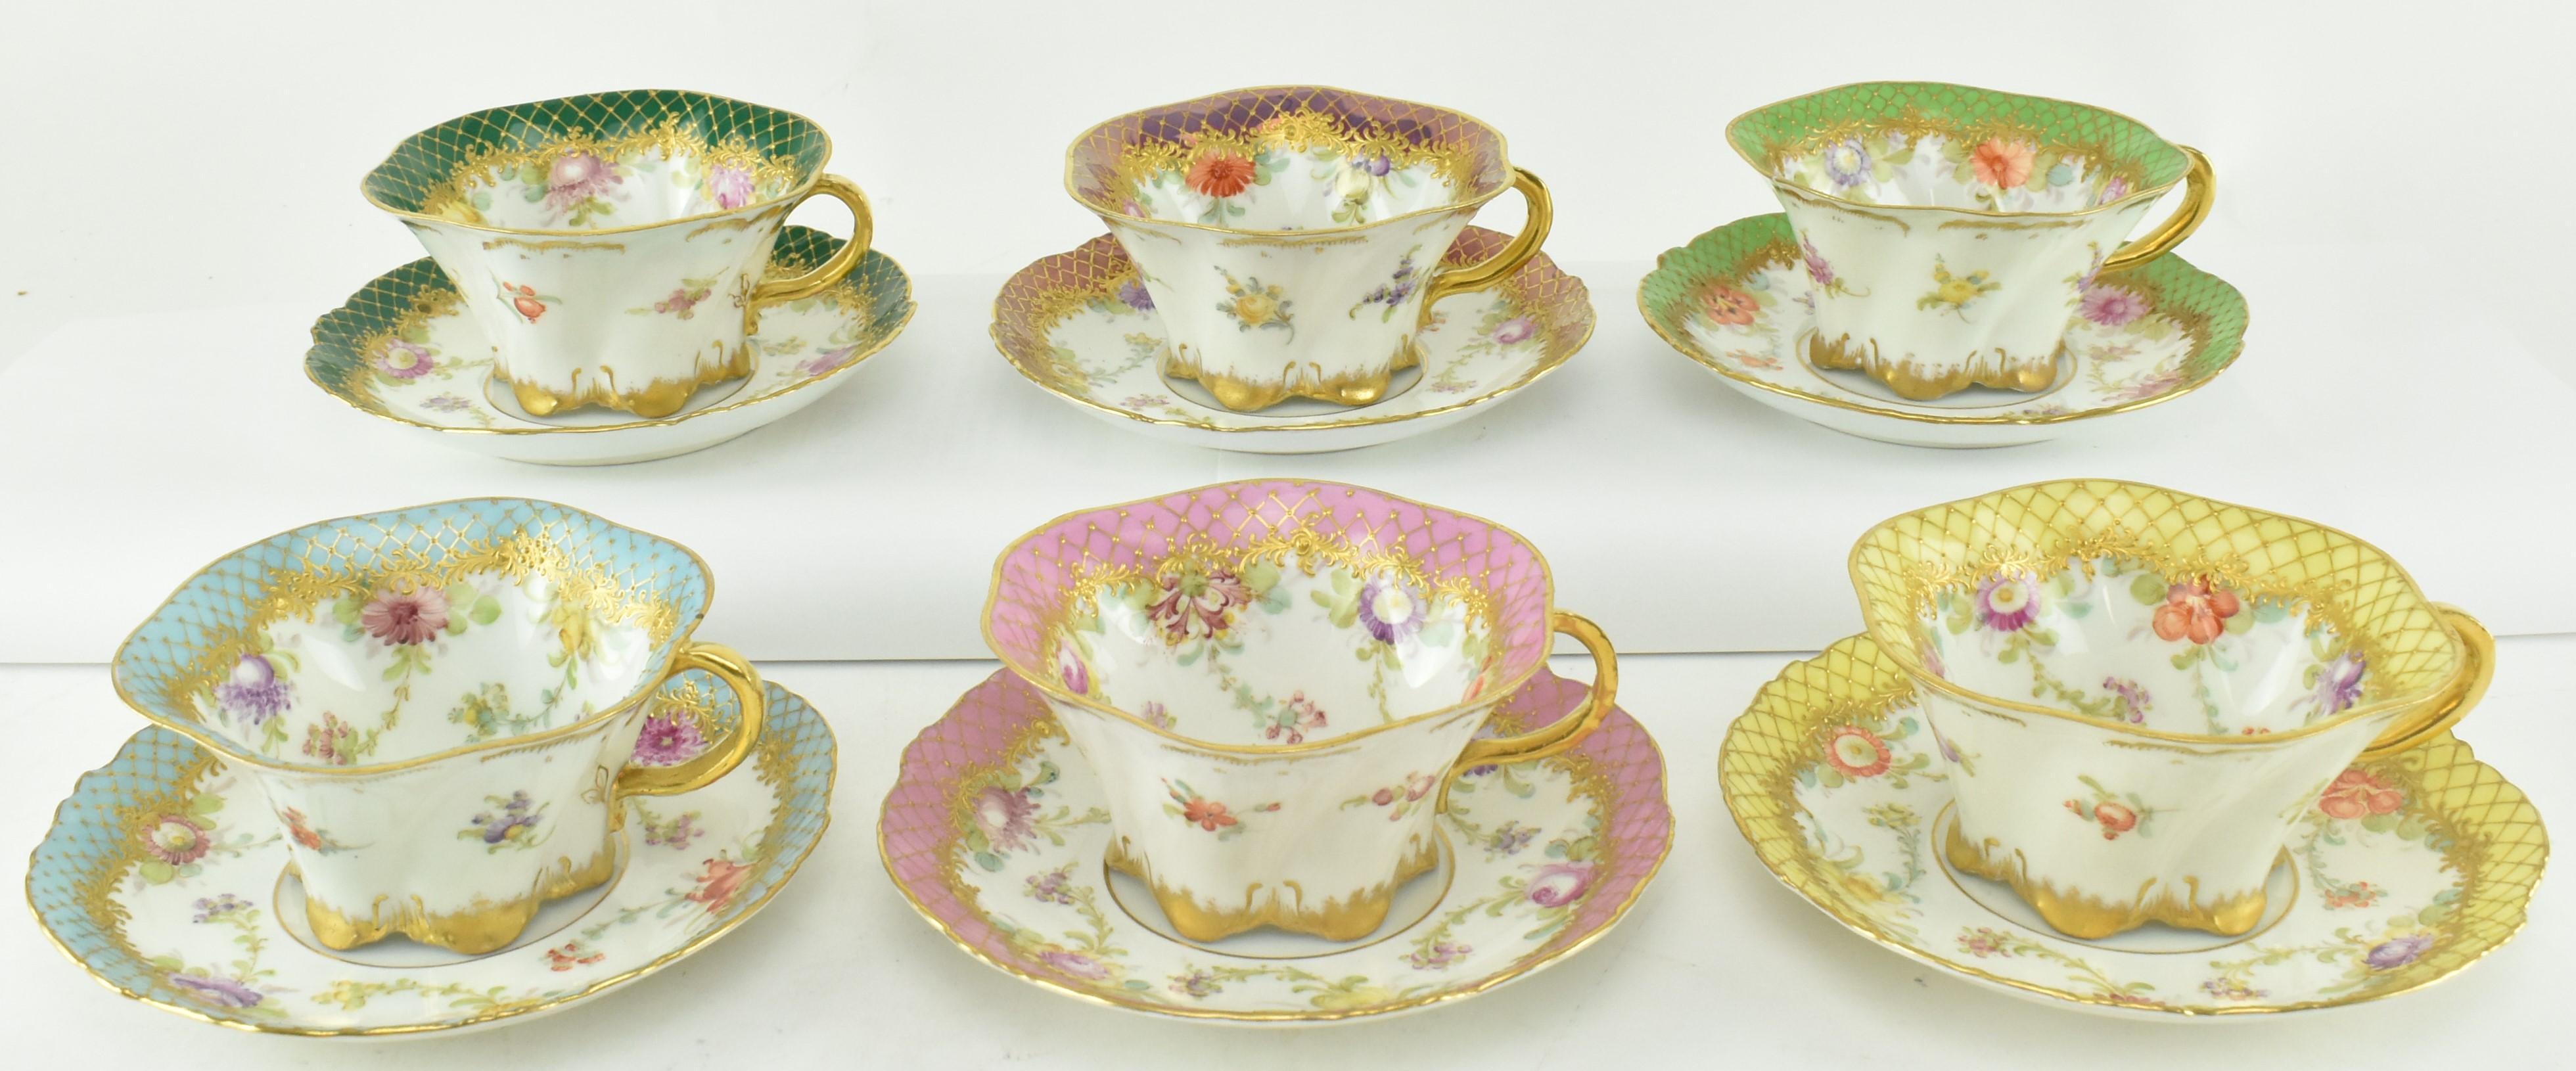 SIX DRESDEN HAND PAINTED CHINA RIBBON EDGE CUPS AND SAUCERS